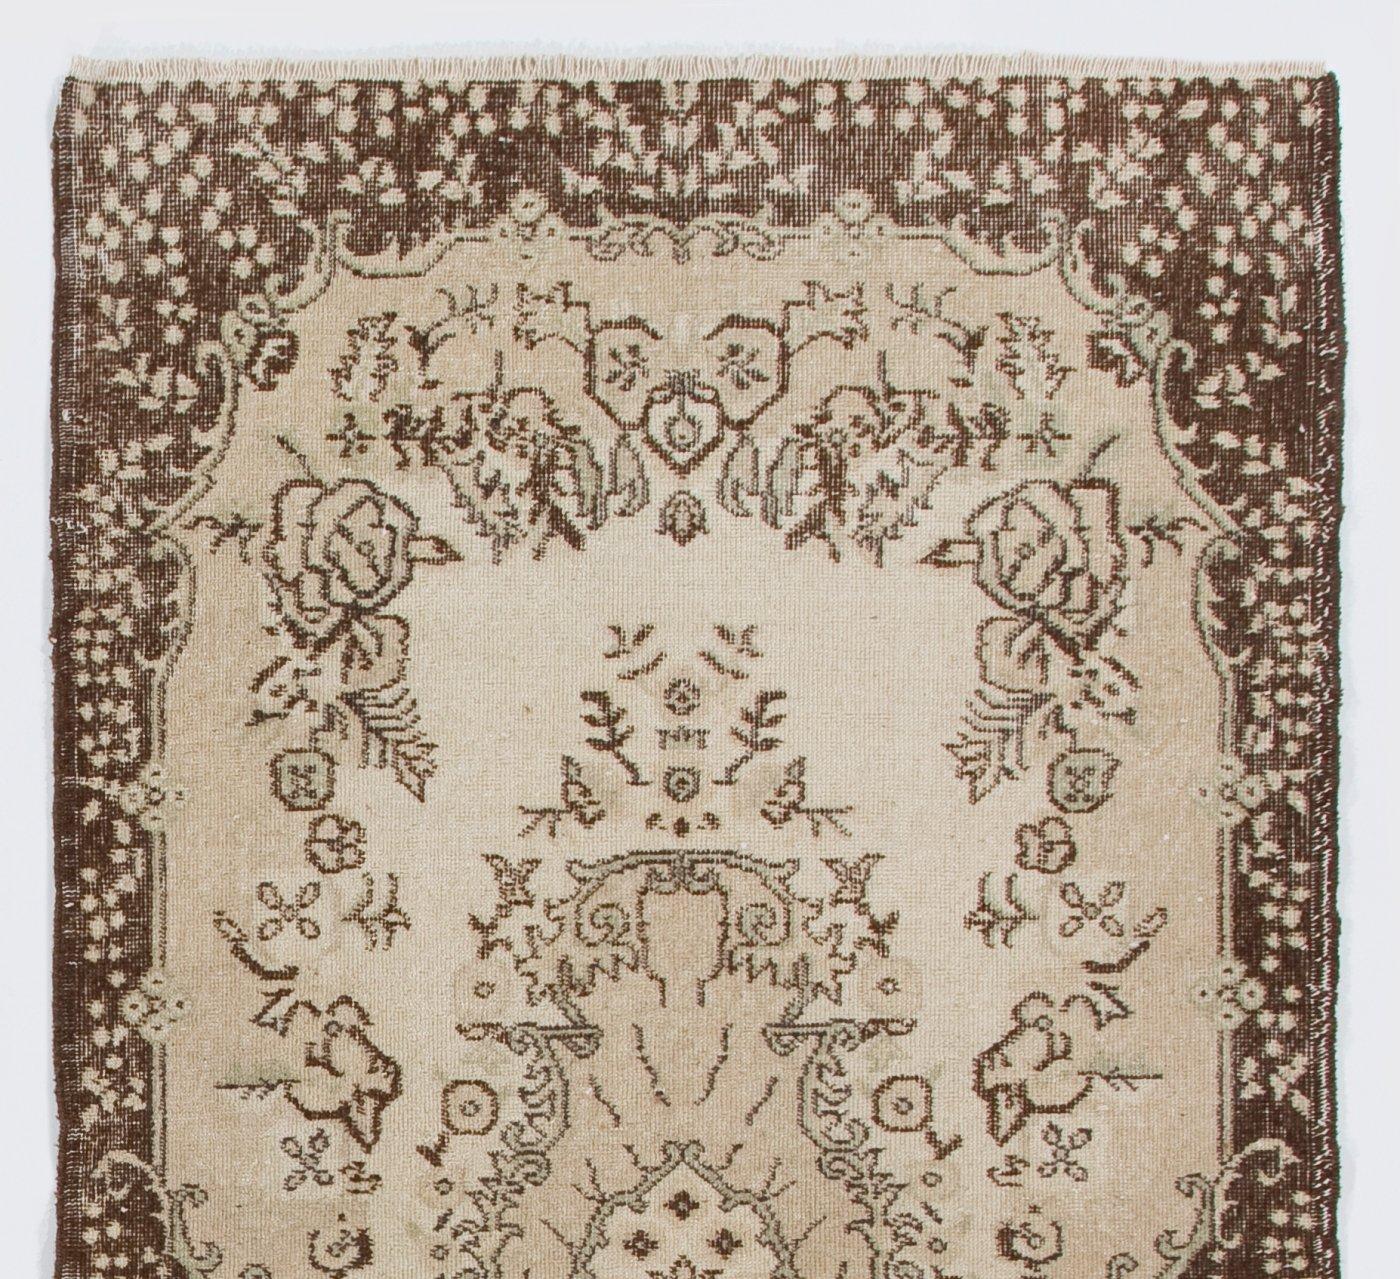 A hand-knotted vintage Turkish accent rug. The rug features a floral medallion design in a field decorated with floral motifs. It has low distressed wool pile on cotton foundation, is in very good condition, sturdy and clean as a brand new rug.